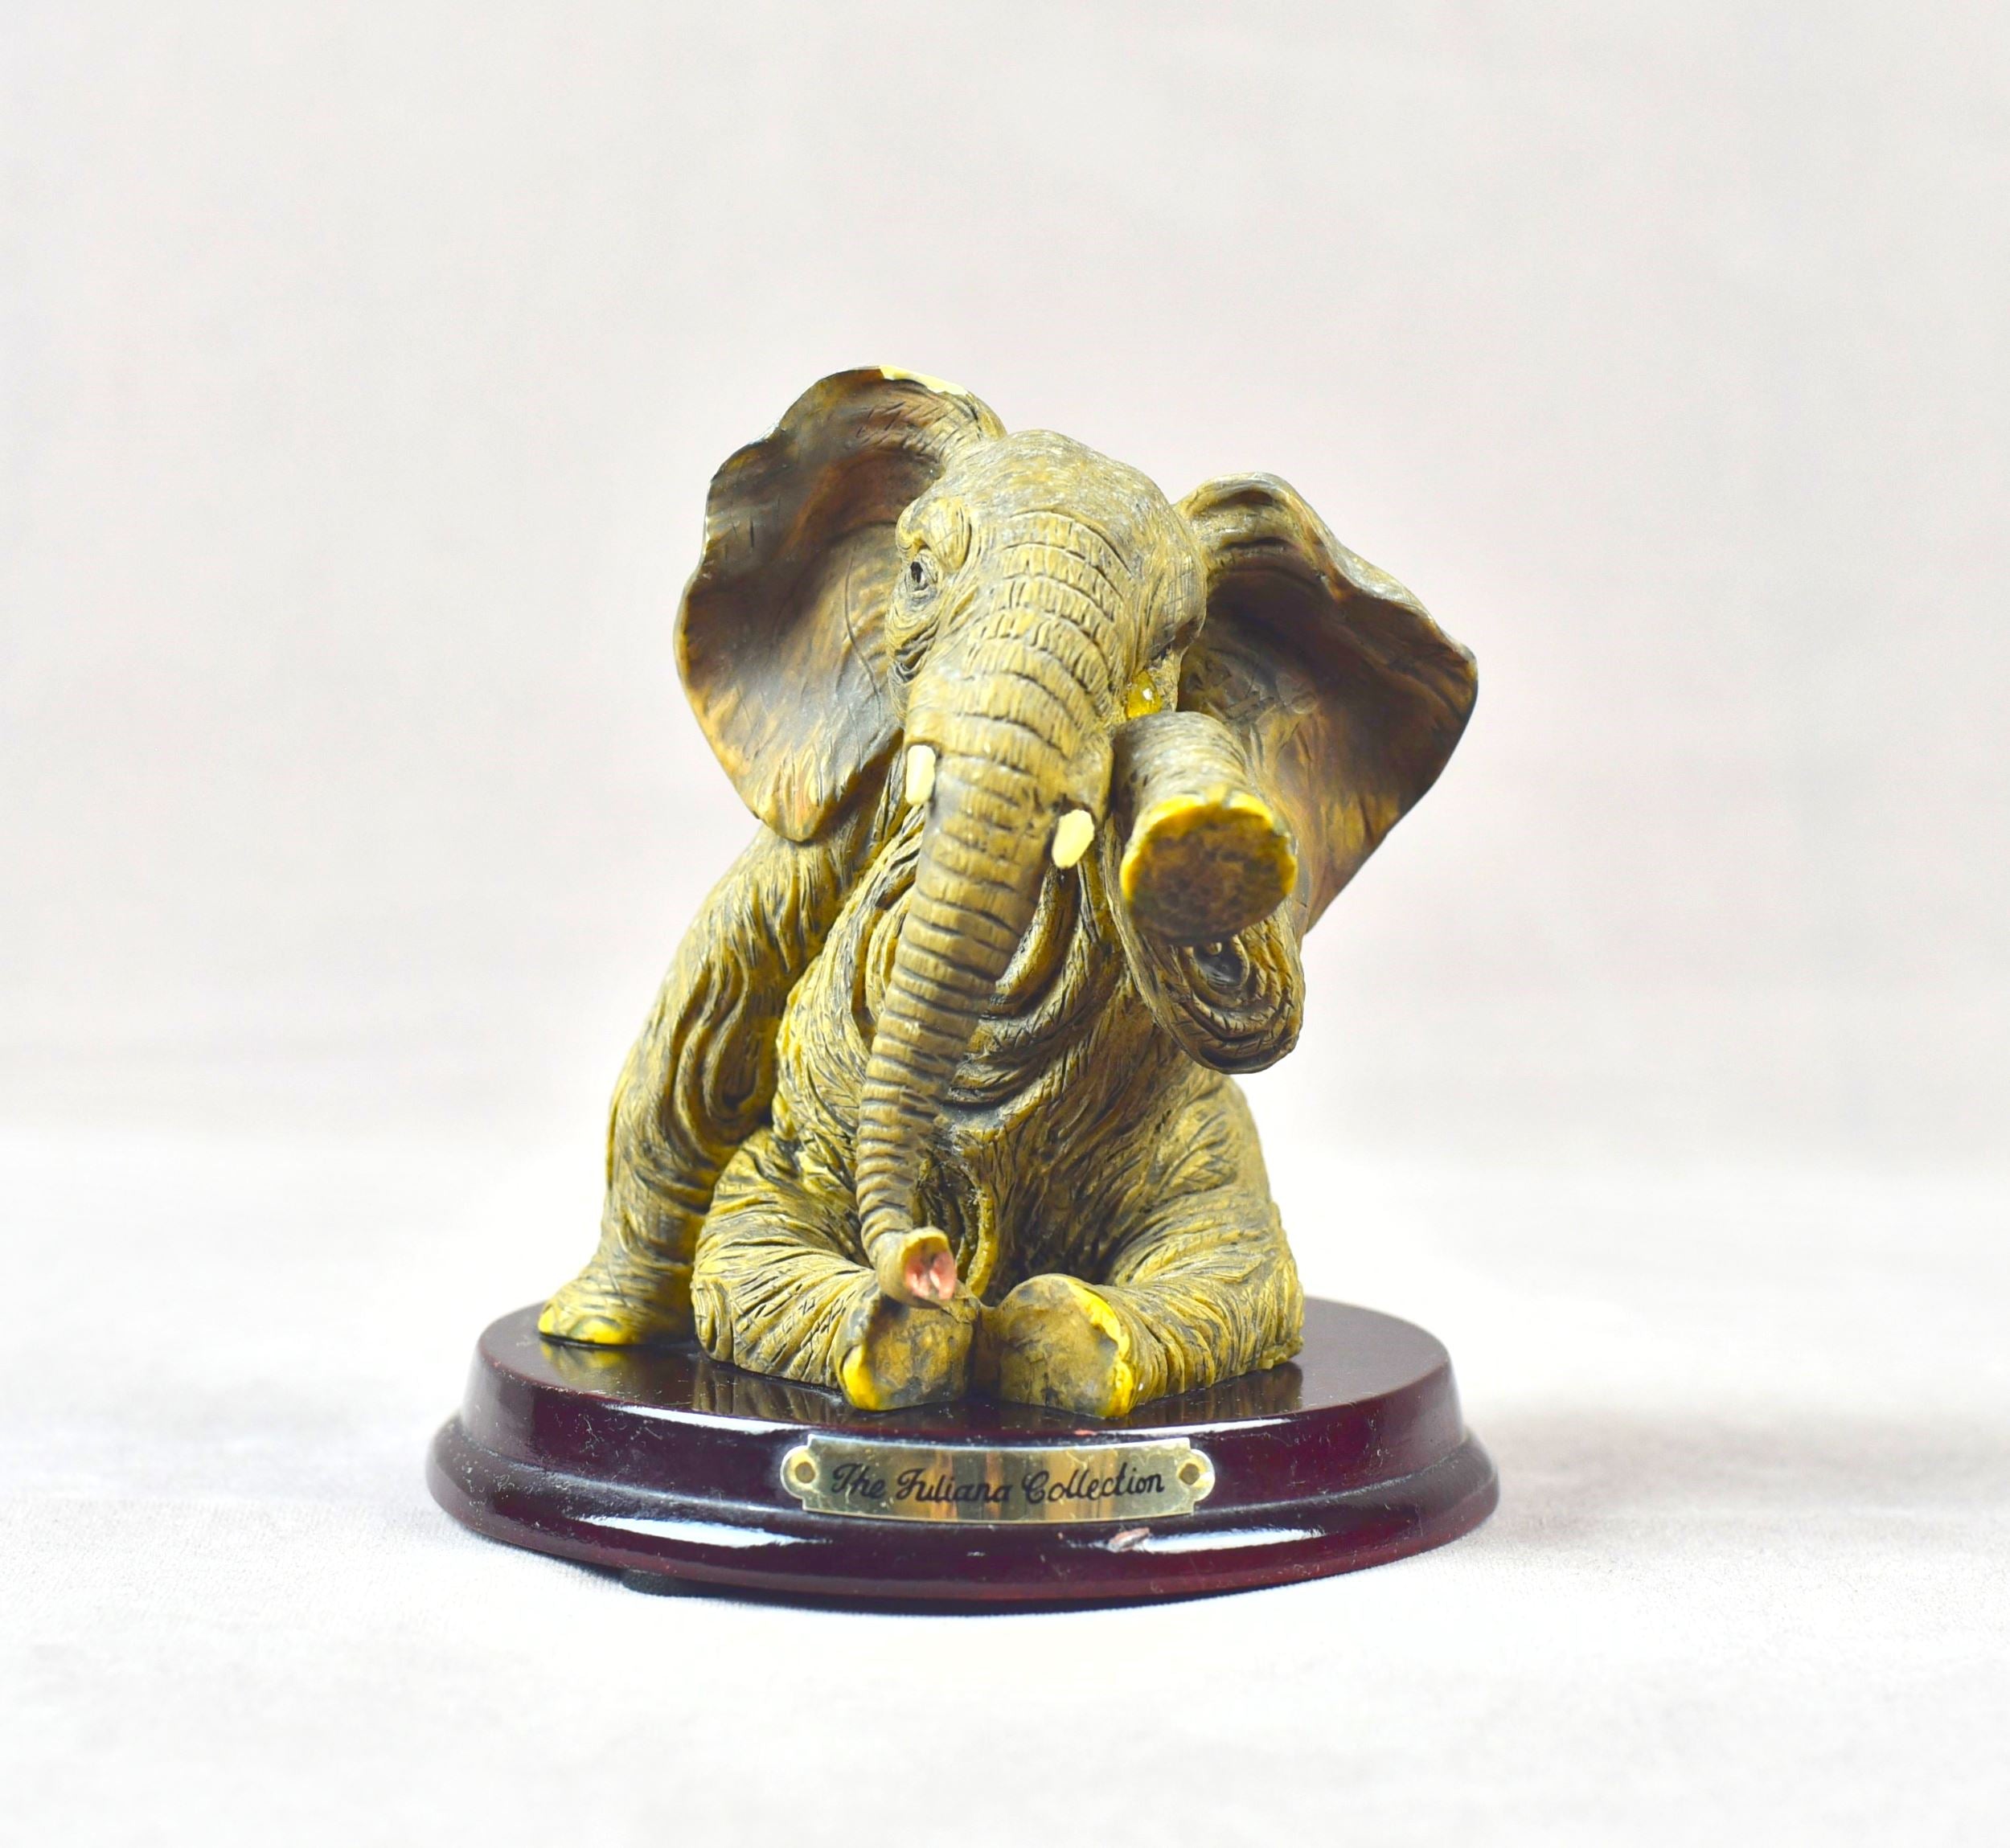 The silent Screams - Juliana Collection in Elephant Collectables - shopeeeys